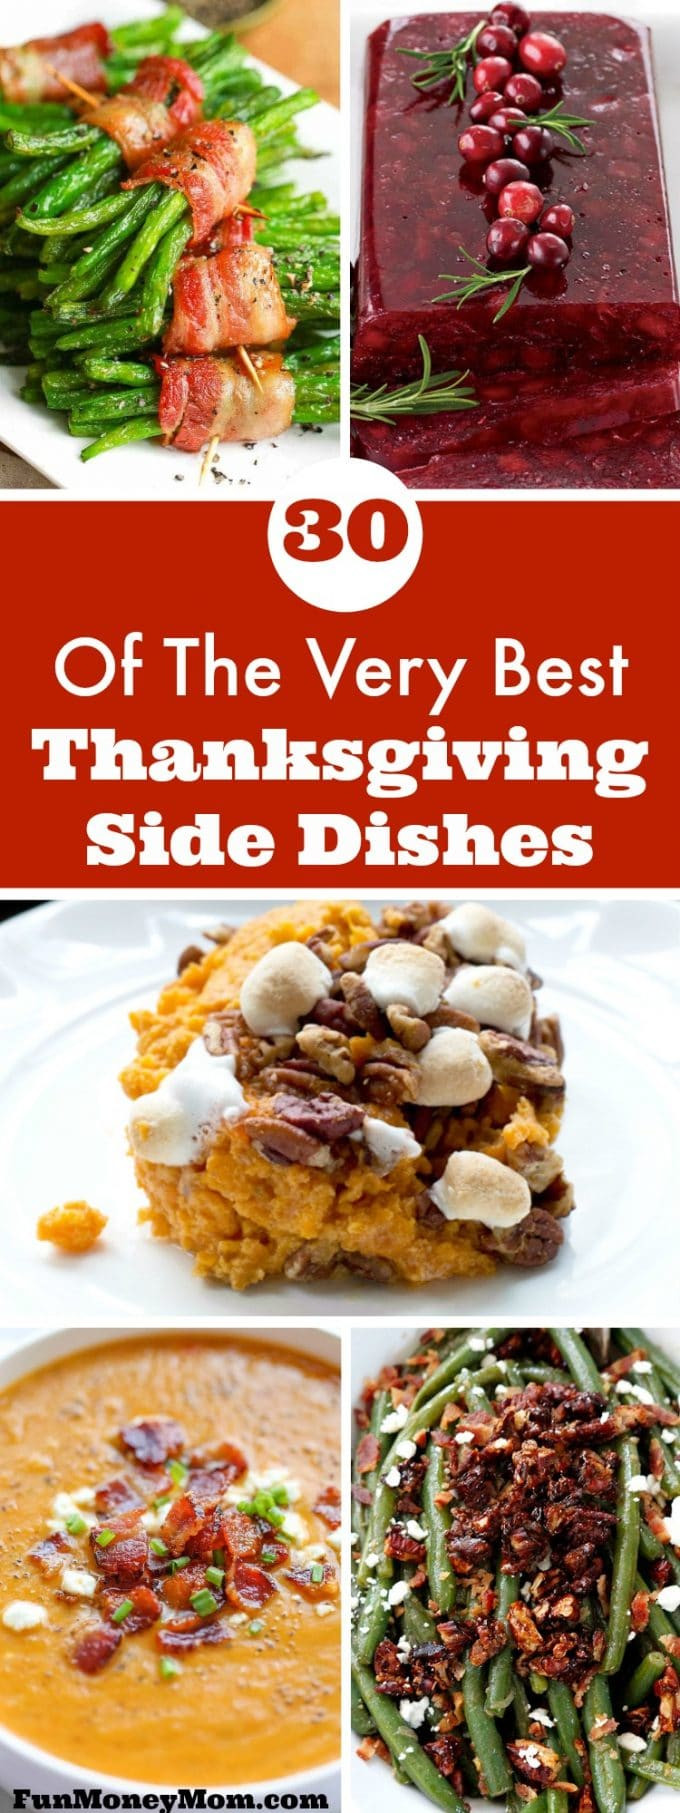 Interesting Thanksgiving Side Dishes
 The Best Thanksgiving Side Dishes For Your Holiday Celebration